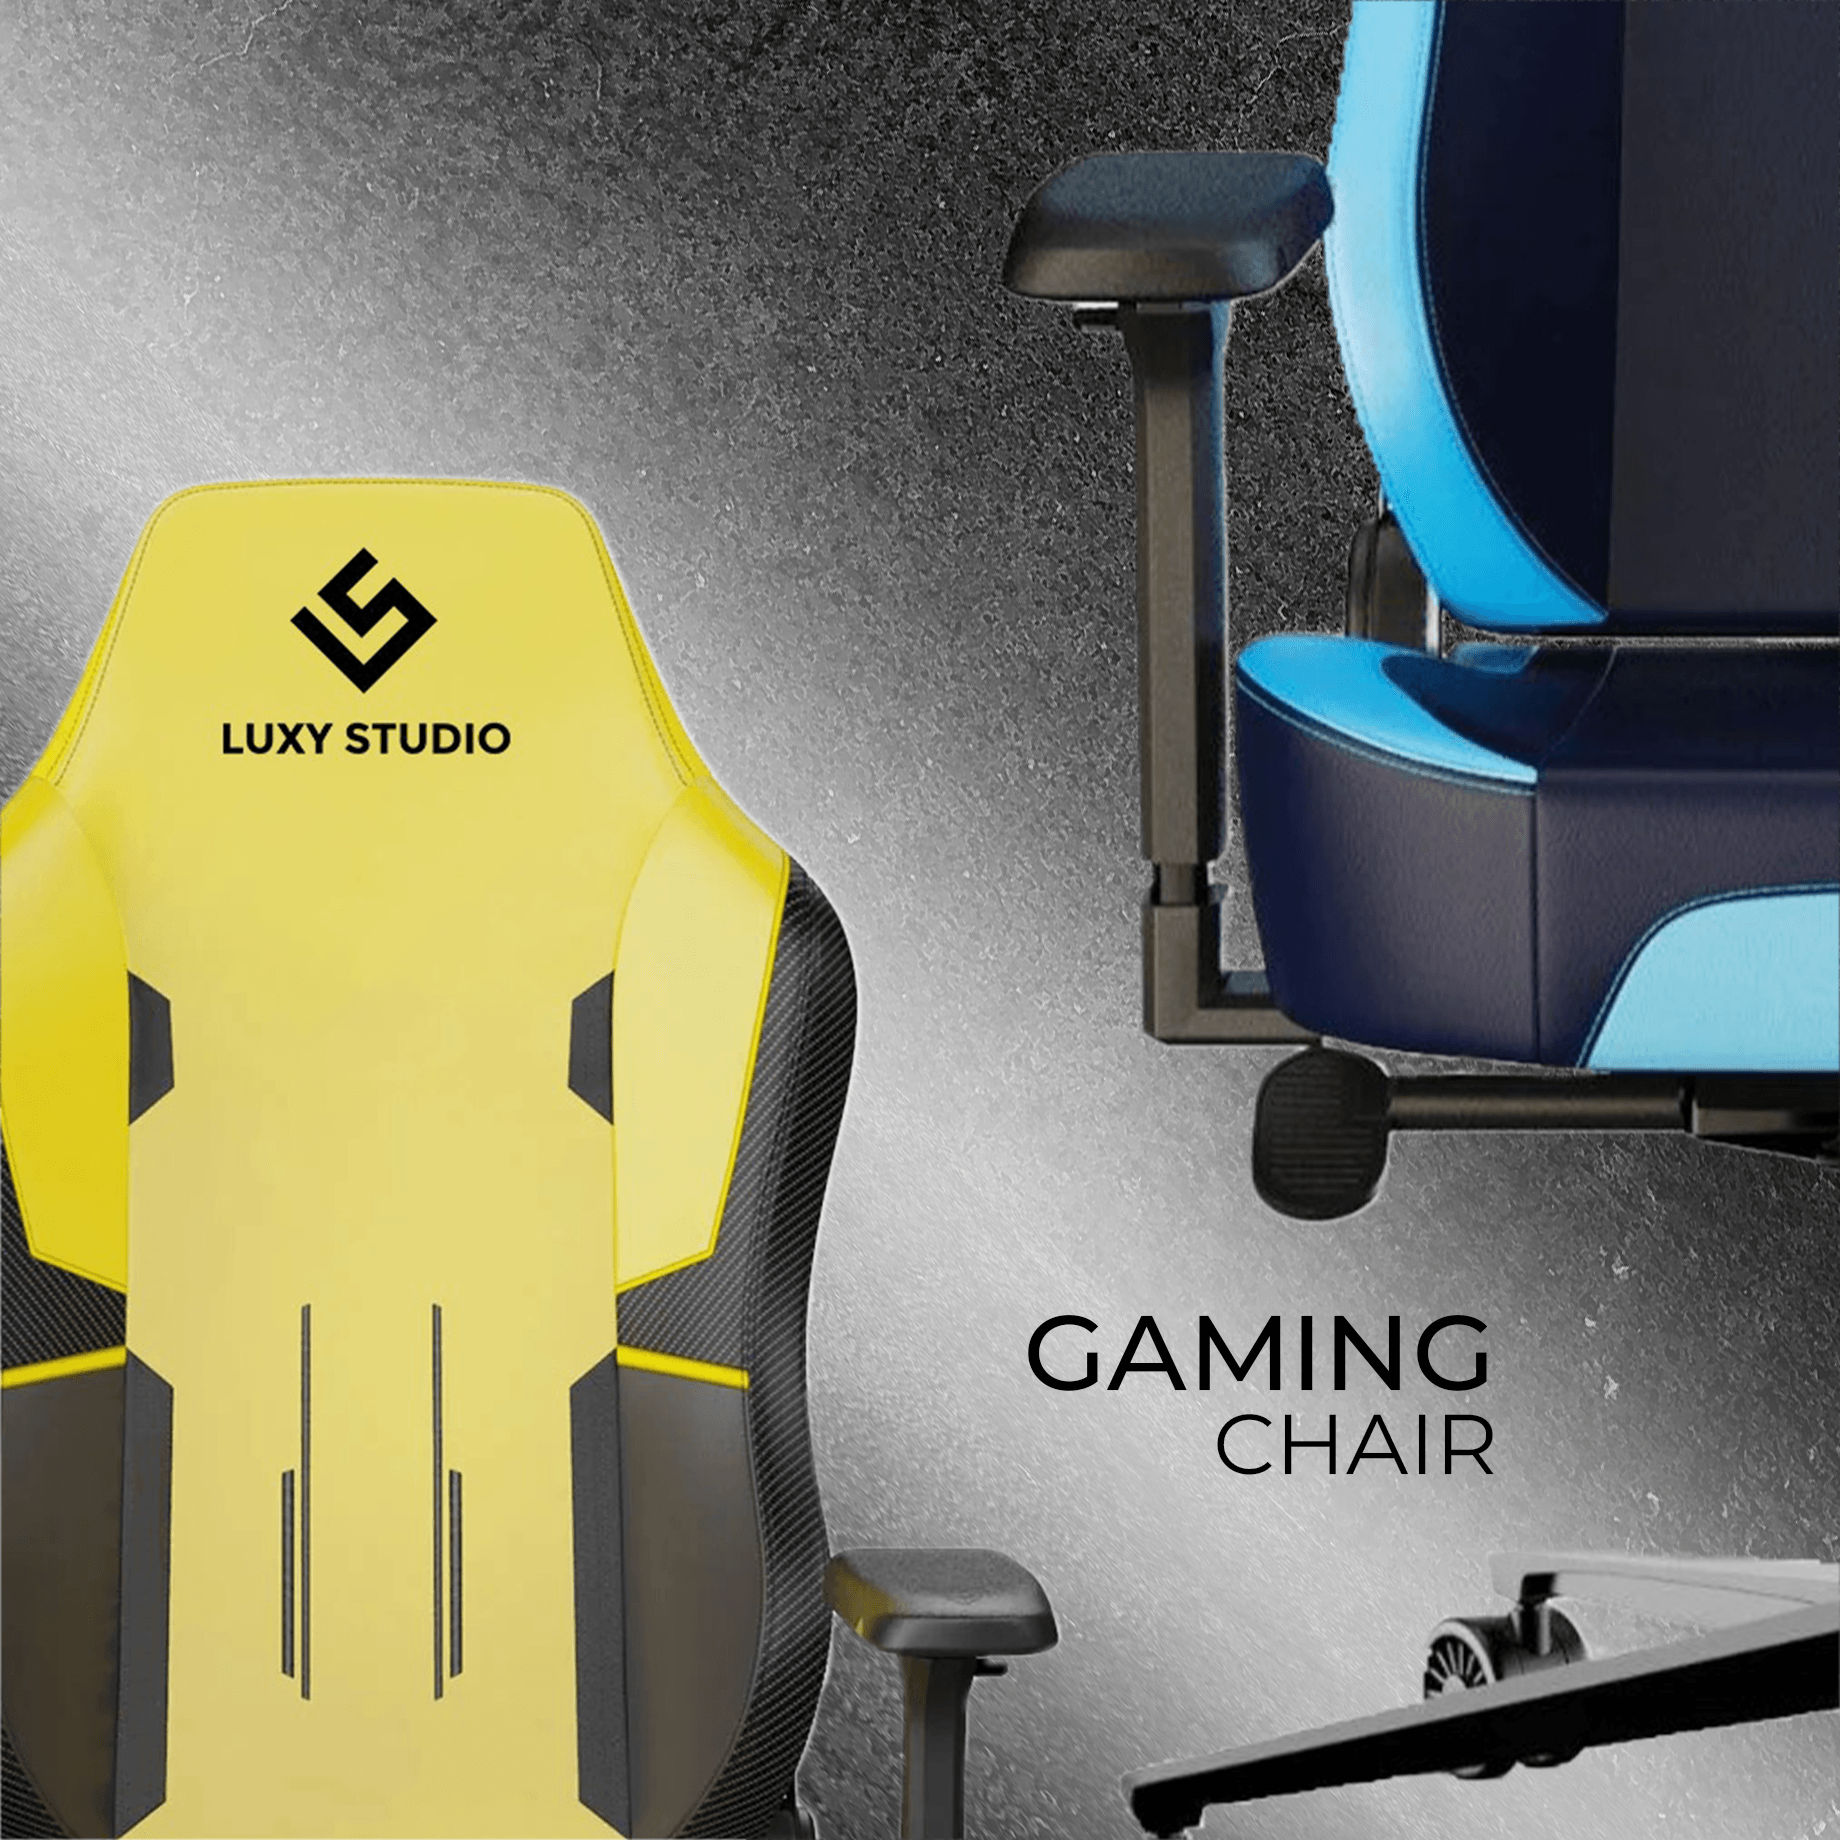 Gaming chairs - Luxystudio